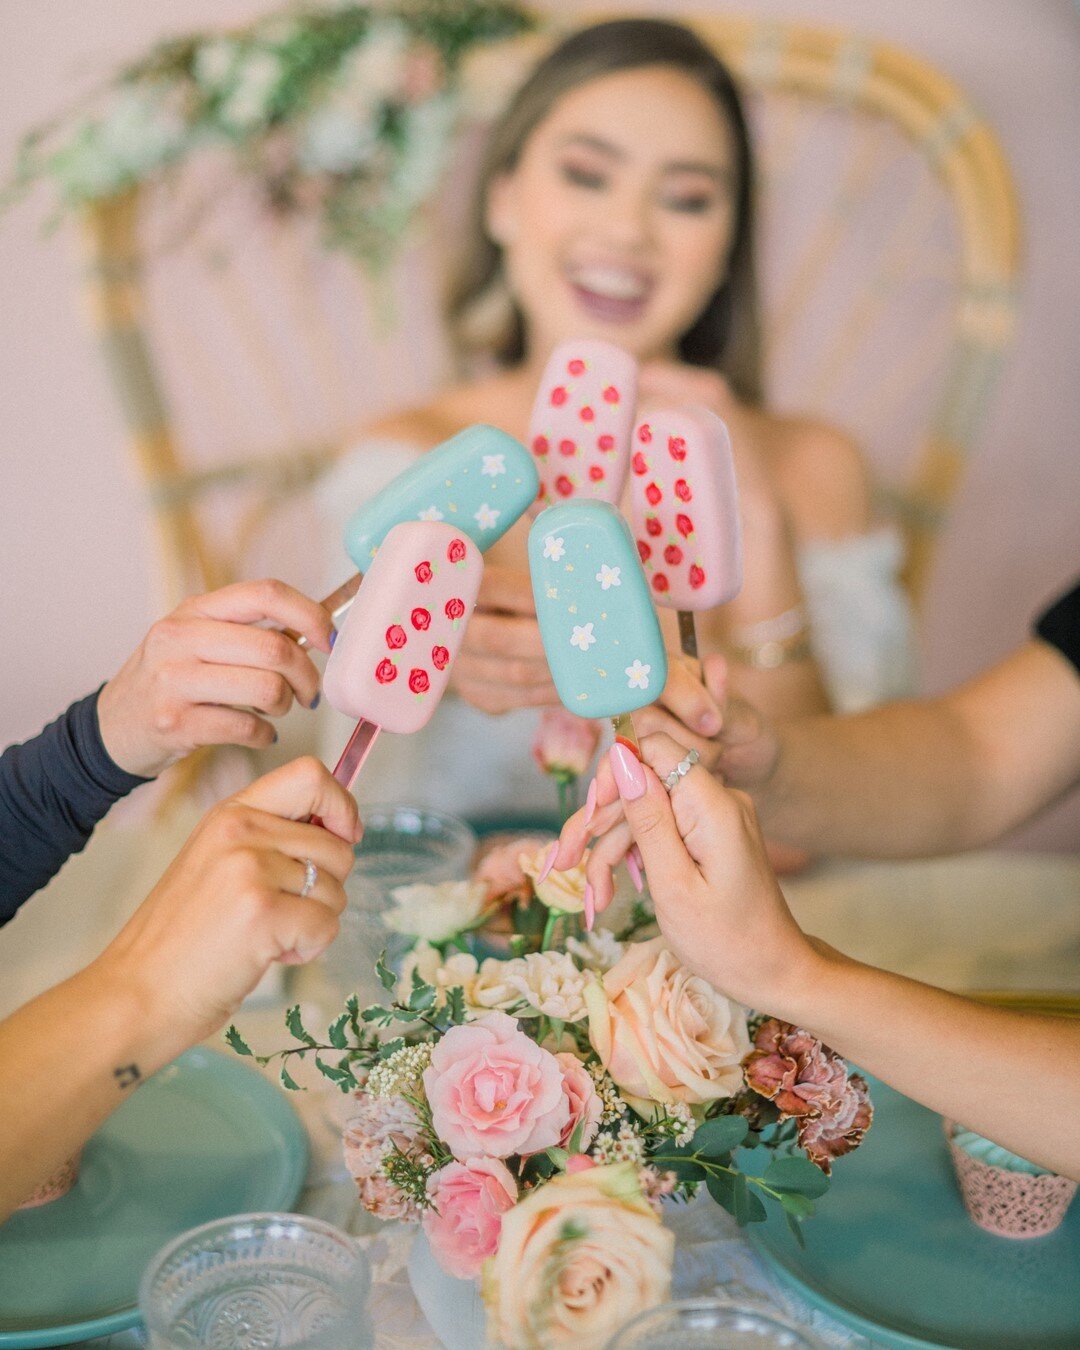 Cheers to the weekend! How cute are these cakesicles by @sarahslilsweets!? They paired perfectly with our florals for this sweet bridal shower at @lilynleoscafe⠀⠀⠀⠀⠀⠀⠀⠀⠀
⠀⠀⠀⠀⠀⠀⠀⠀⠀
Planning + Design | @MagicalMoments_byMegan⠀⠀⠀⠀⠀⠀⠀
Florals + Styling |